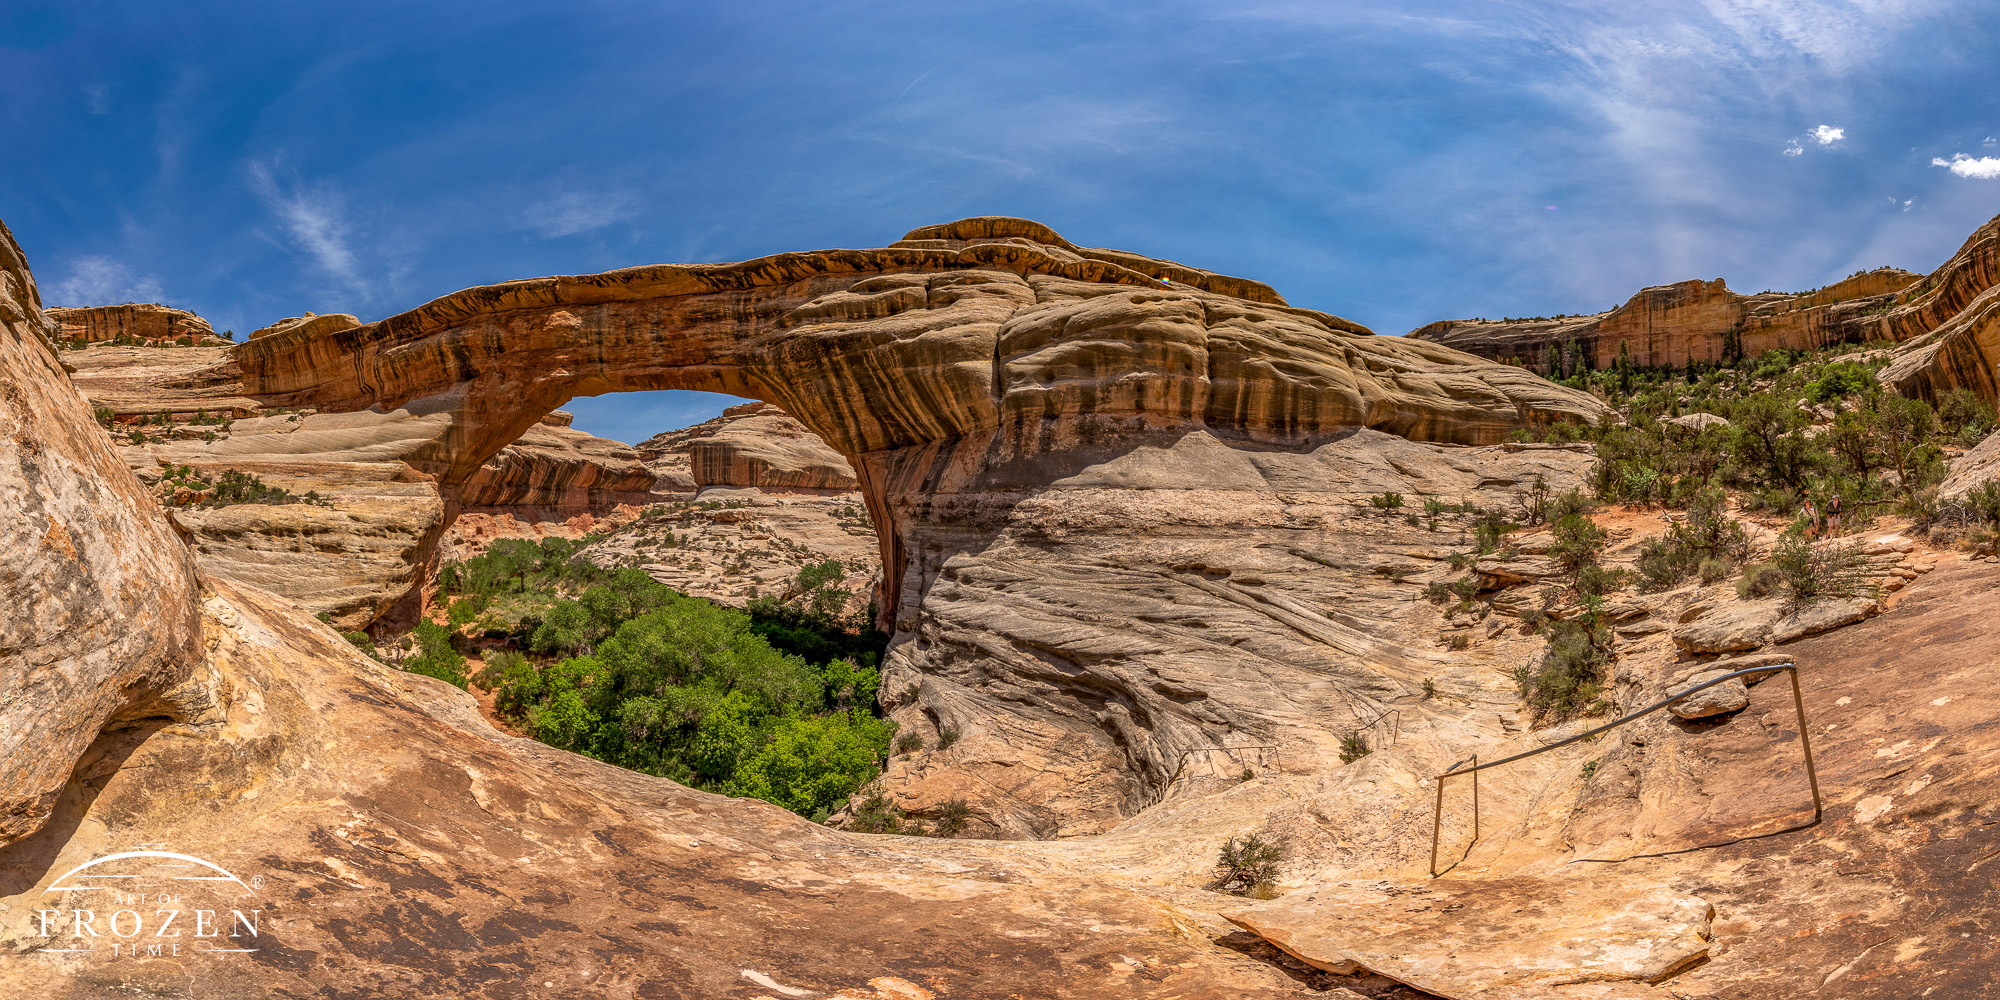 View of the Sipapu Natural Bridge from inside Natural Bridges National Monument where the stone arch spans the blue skies